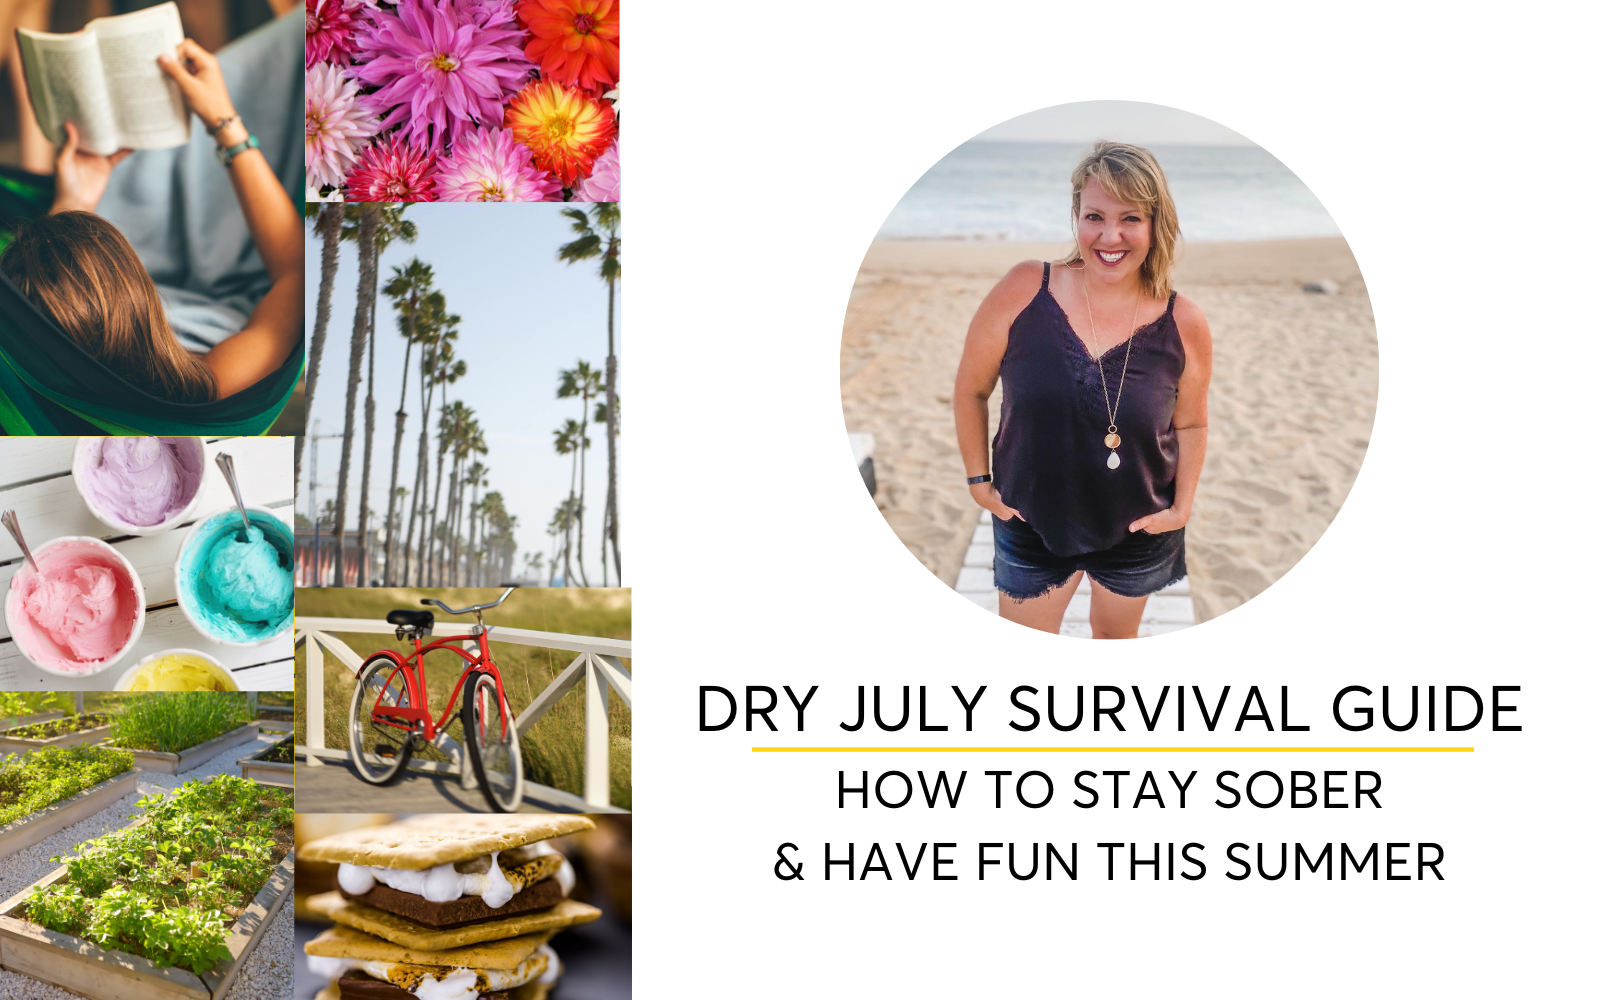 Dry July Survival Guide – How to Stay Sober & Have Fun This Summer